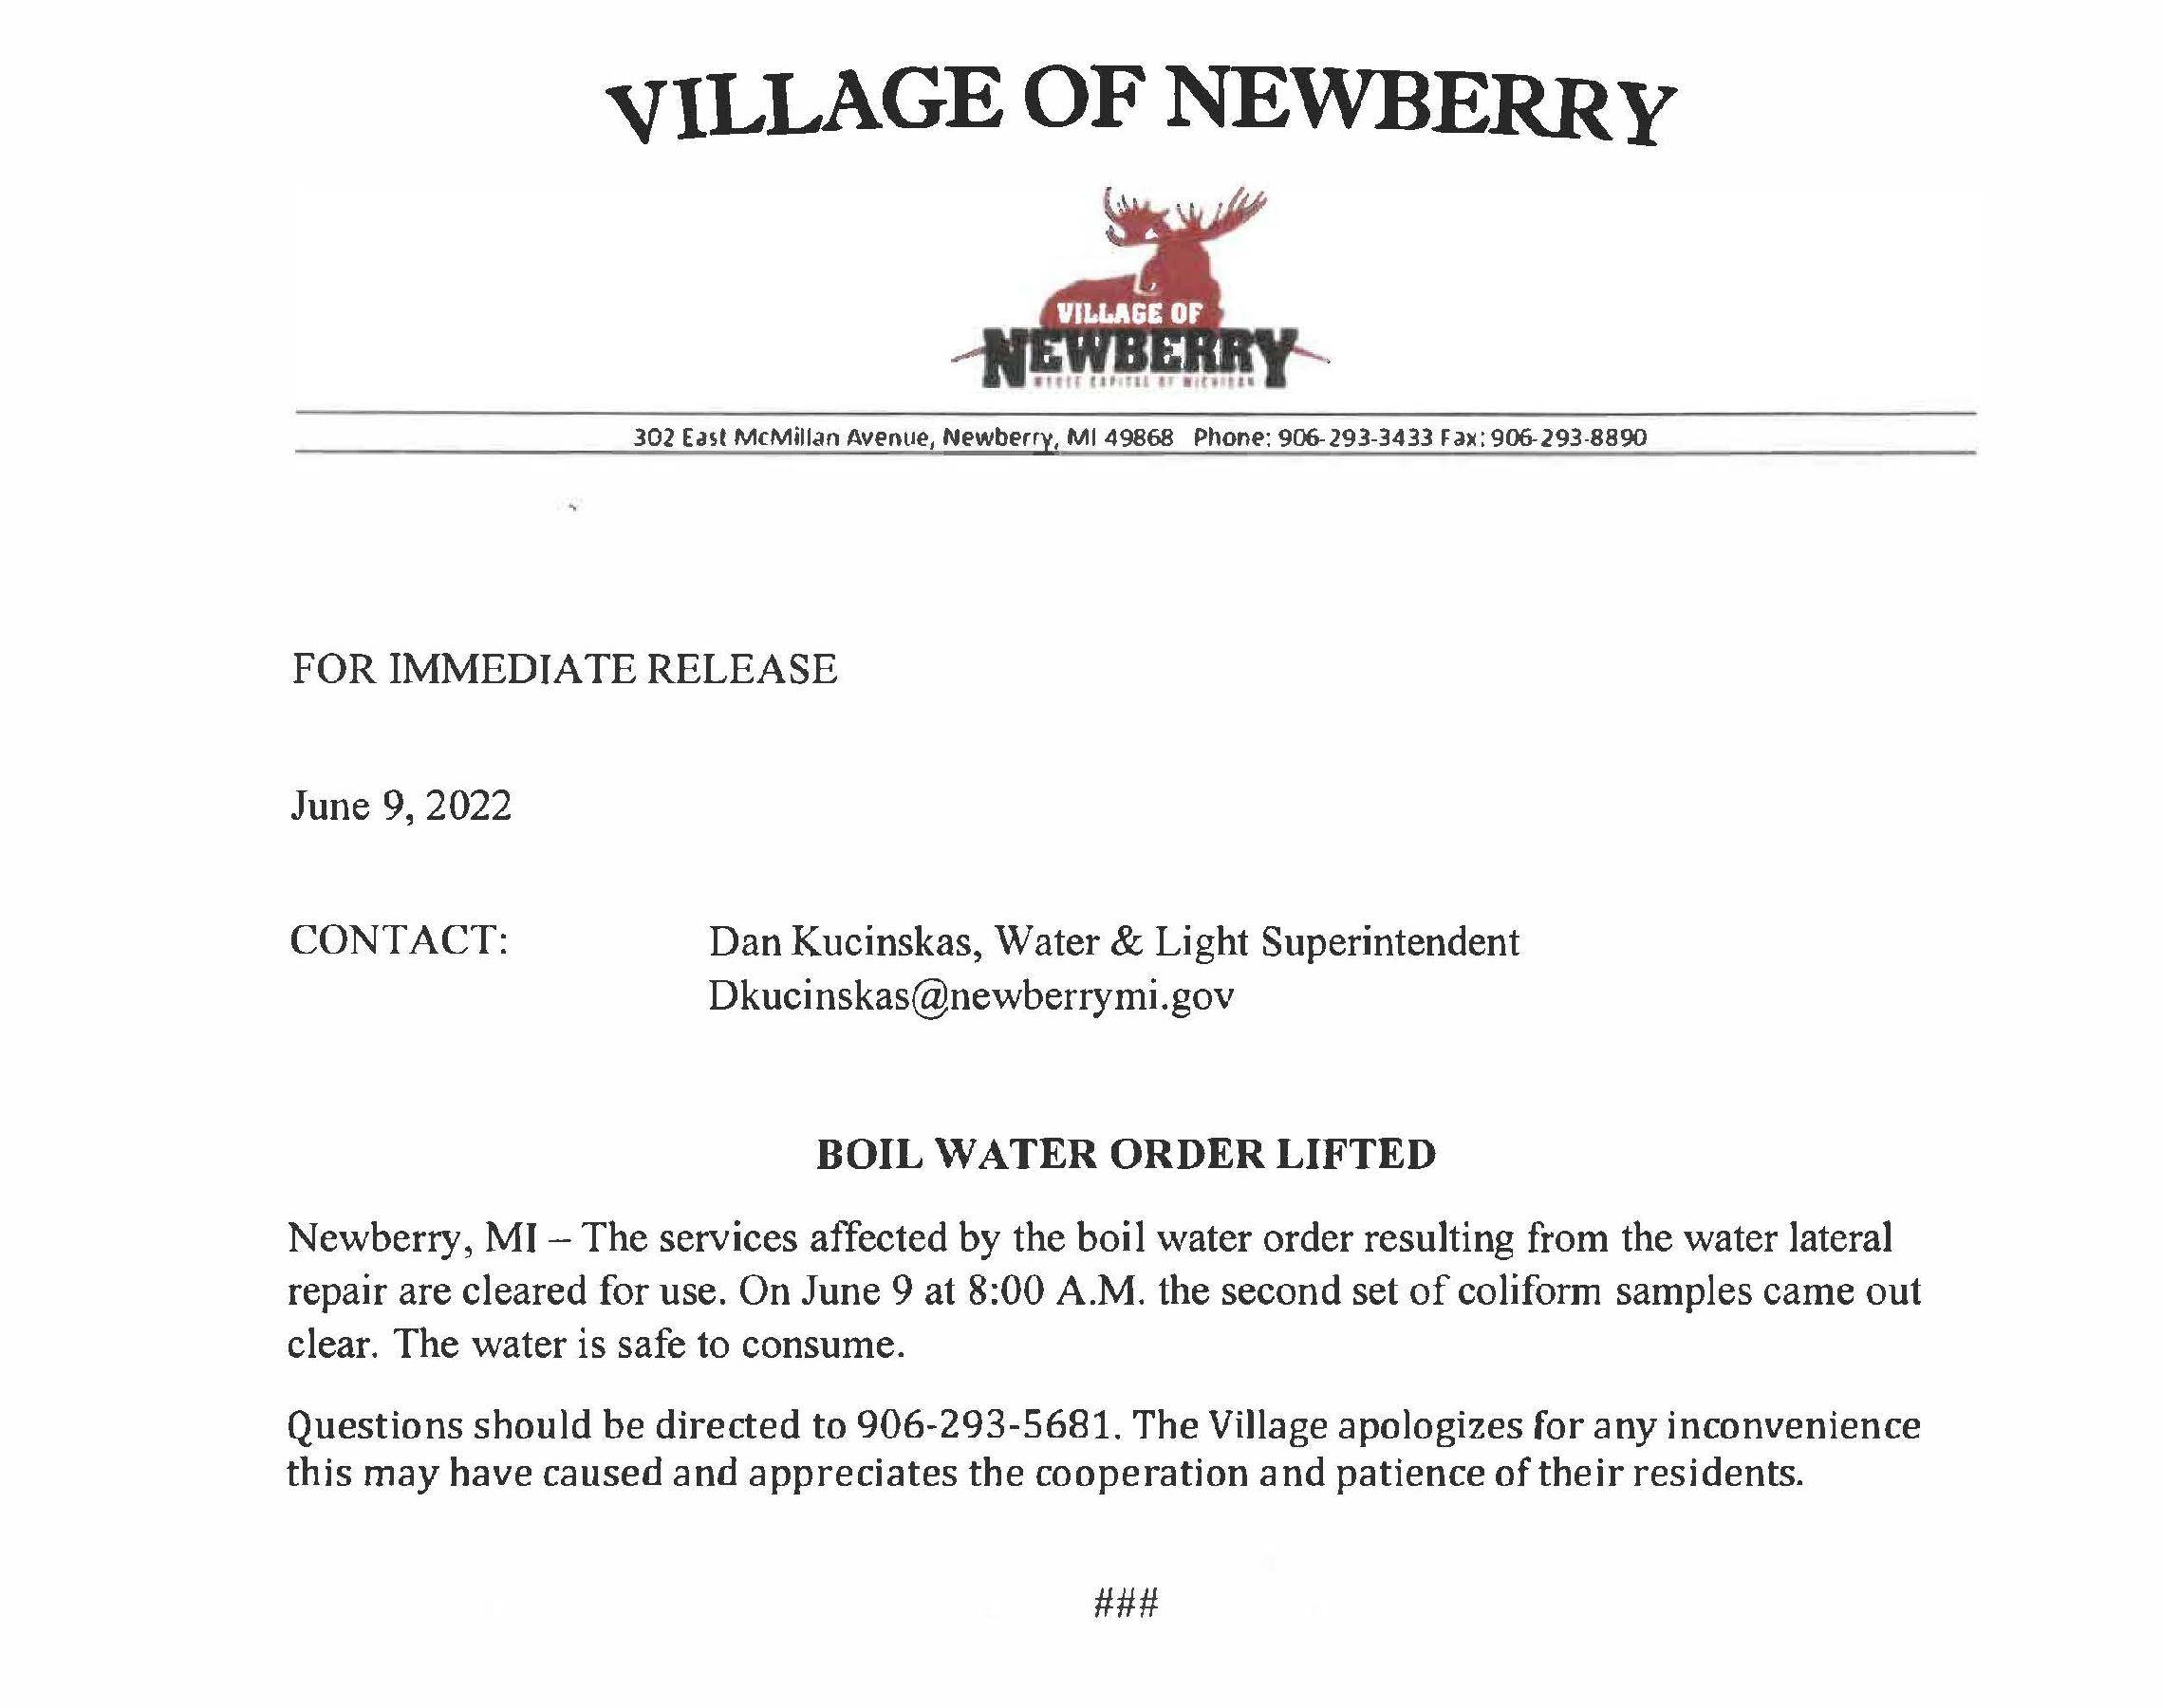 Boil Water Notice Lifted - Copy